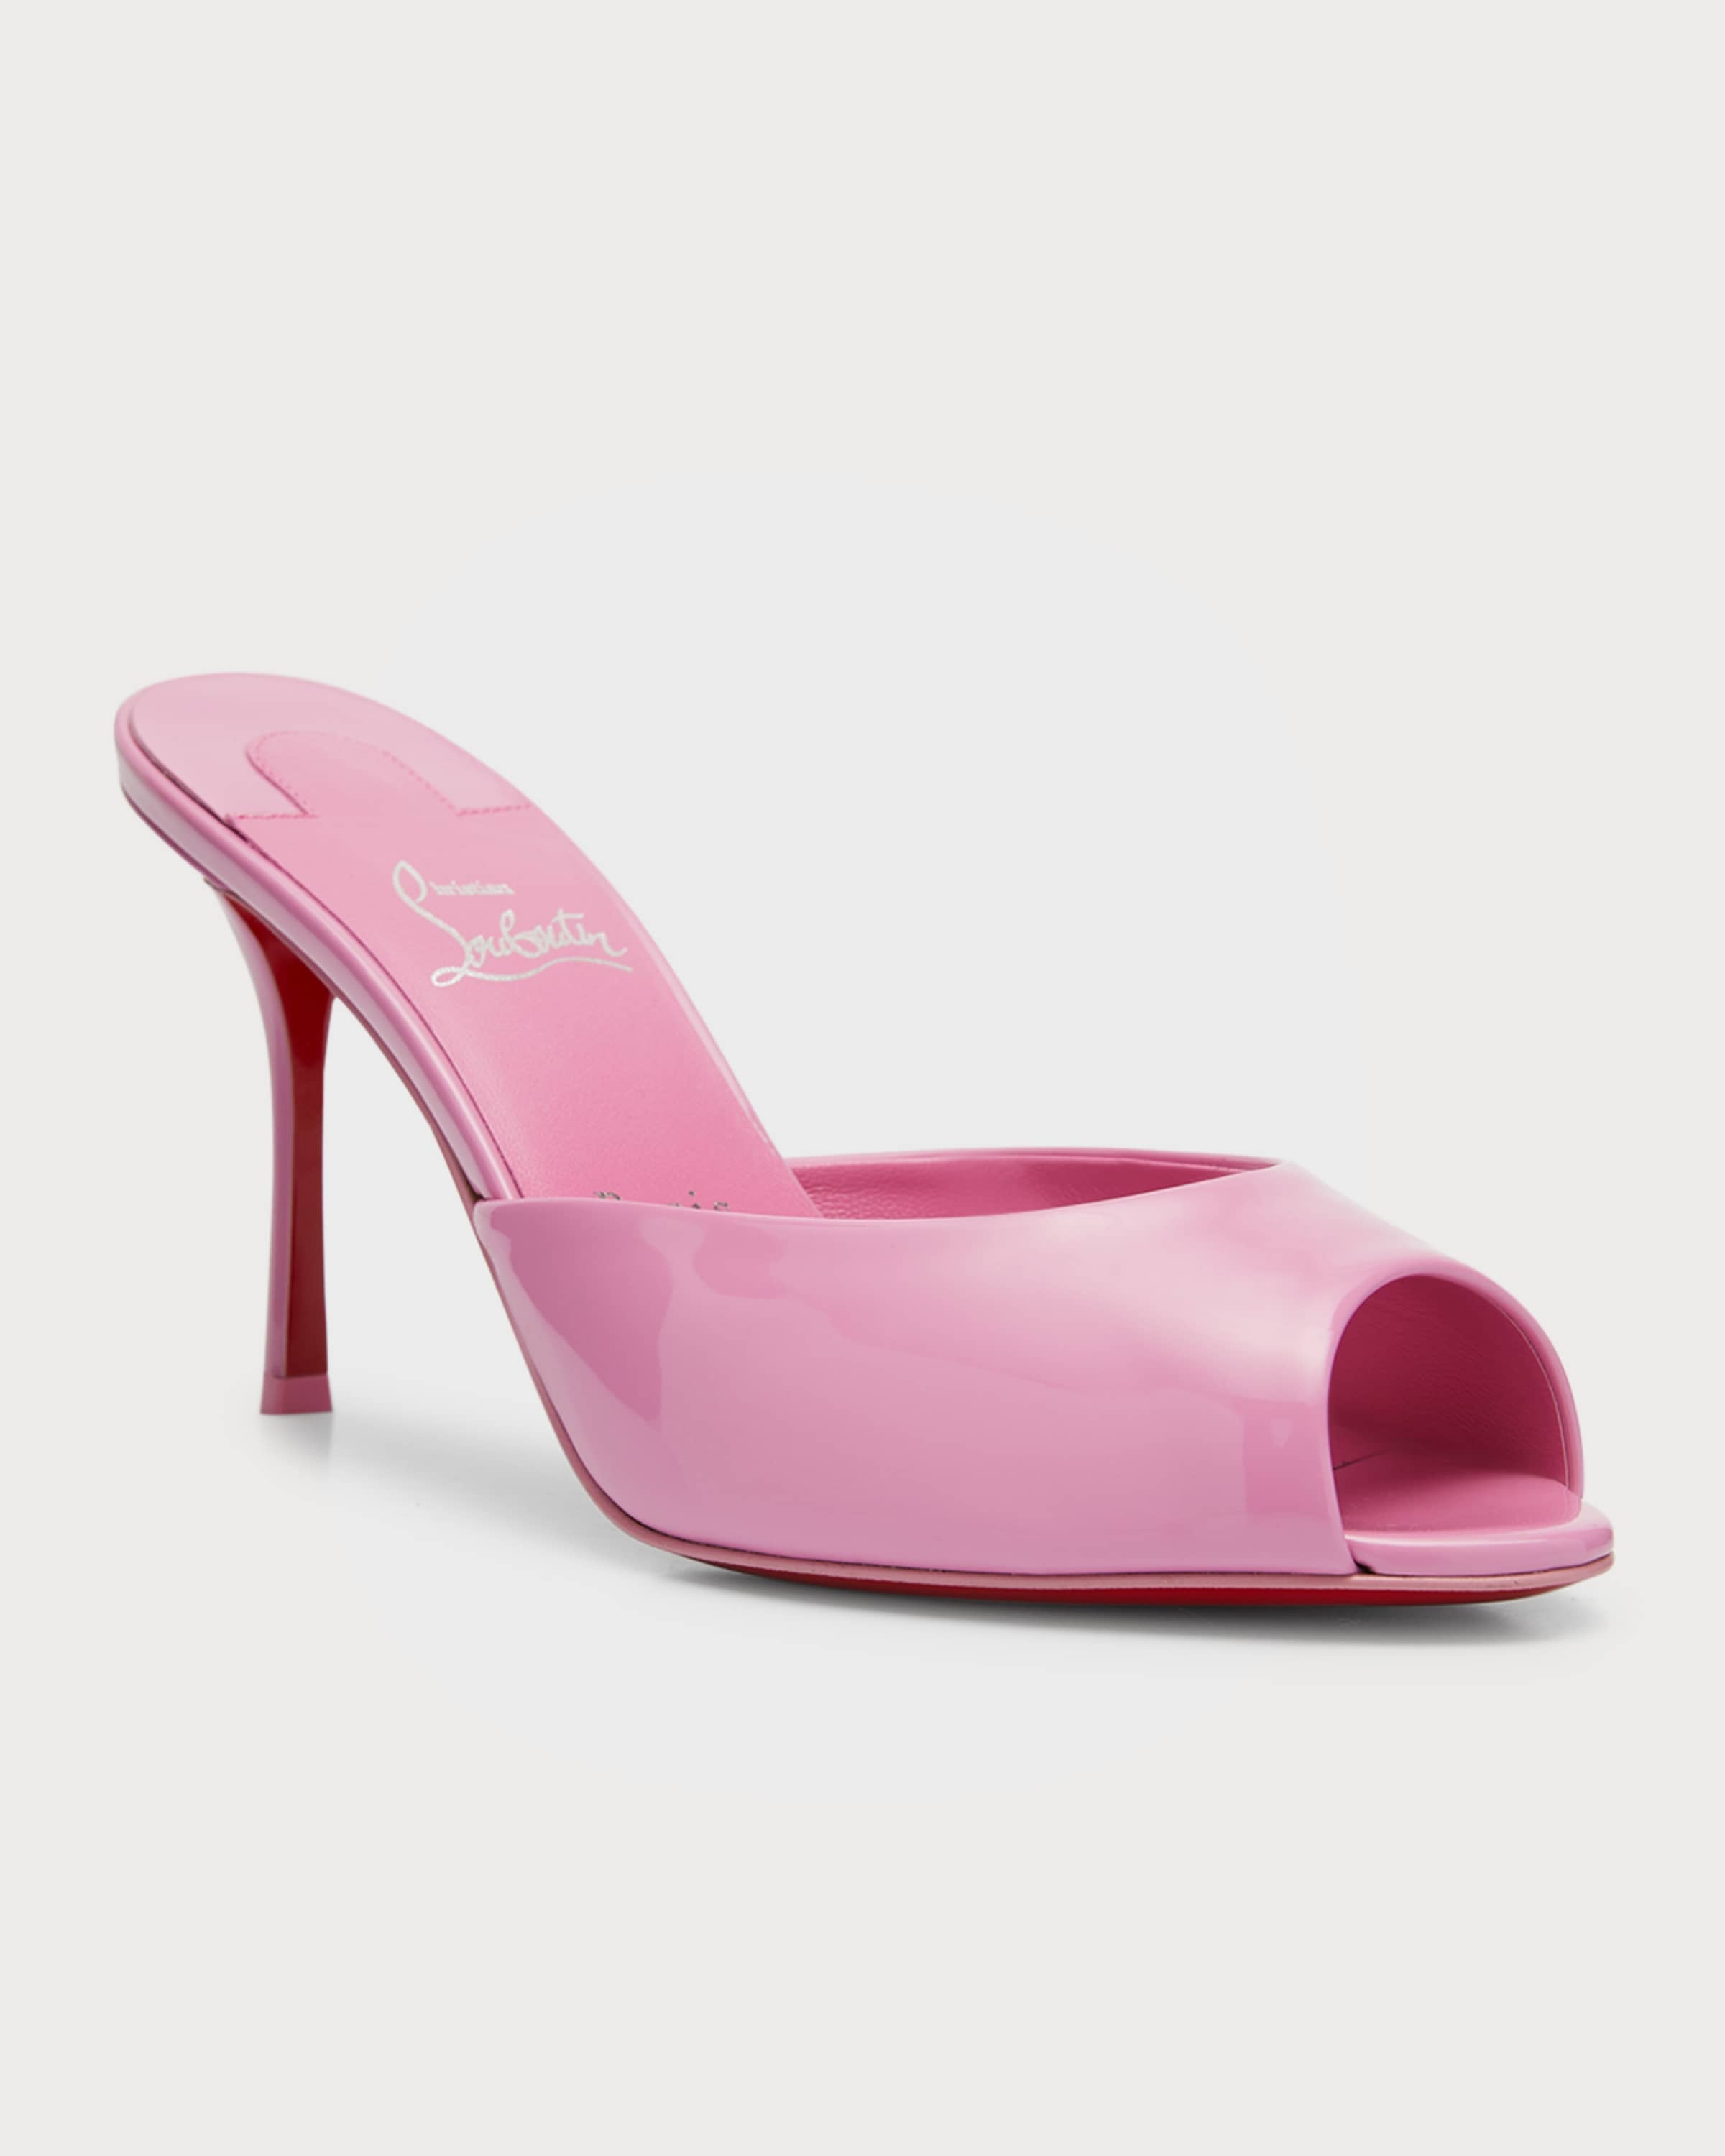 Me Dolly Patent Red Sole Sandals - 4